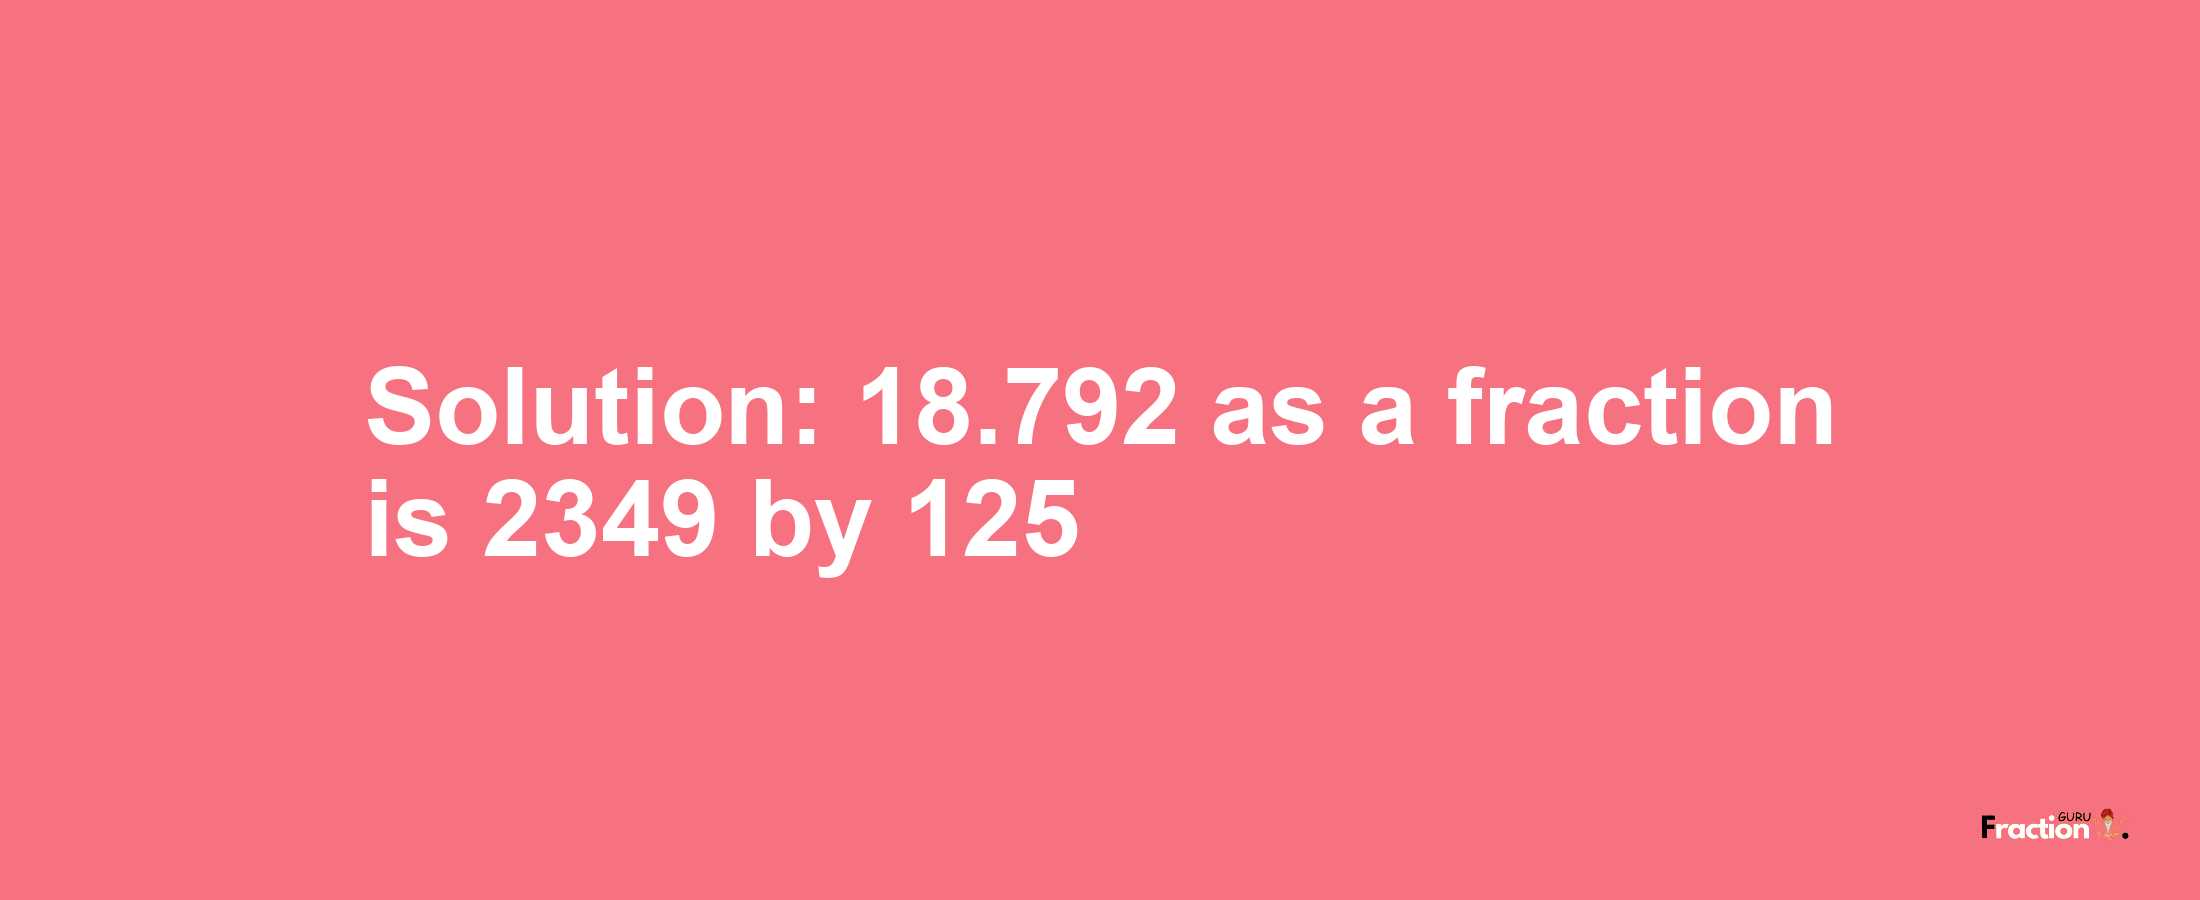 Solution:18.792 as a fraction is 2349/125